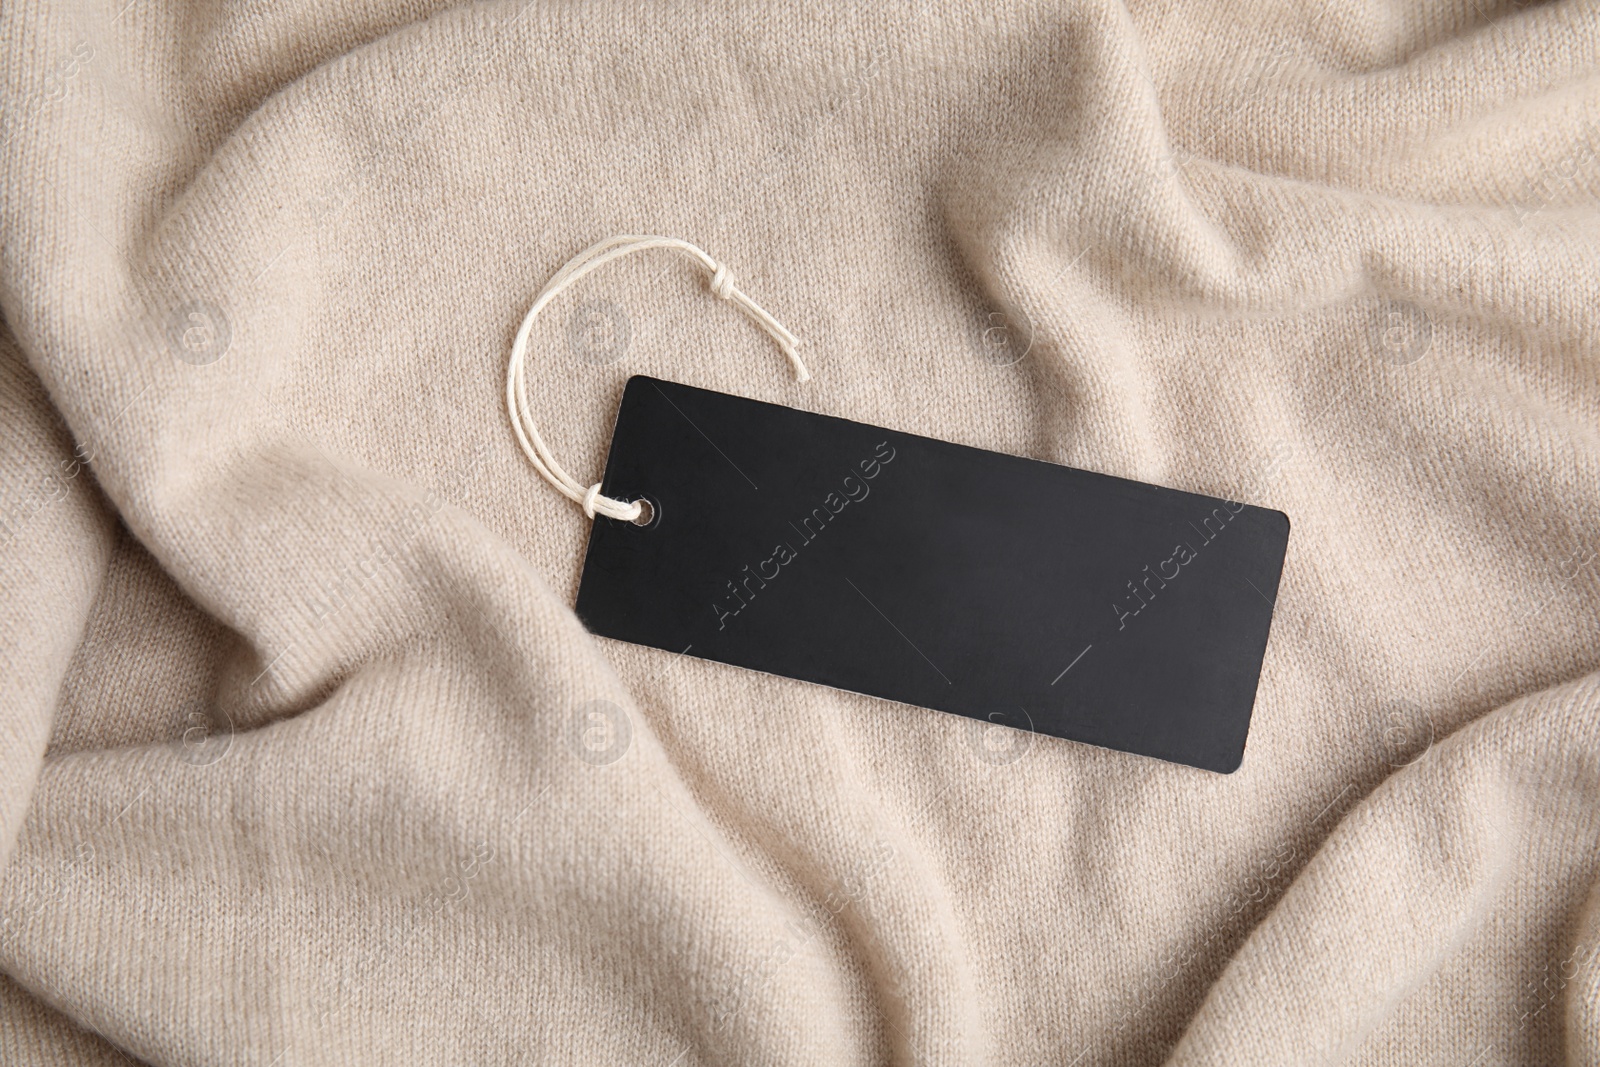 Photo of Warm beige cashmere sweater with tag, closeup